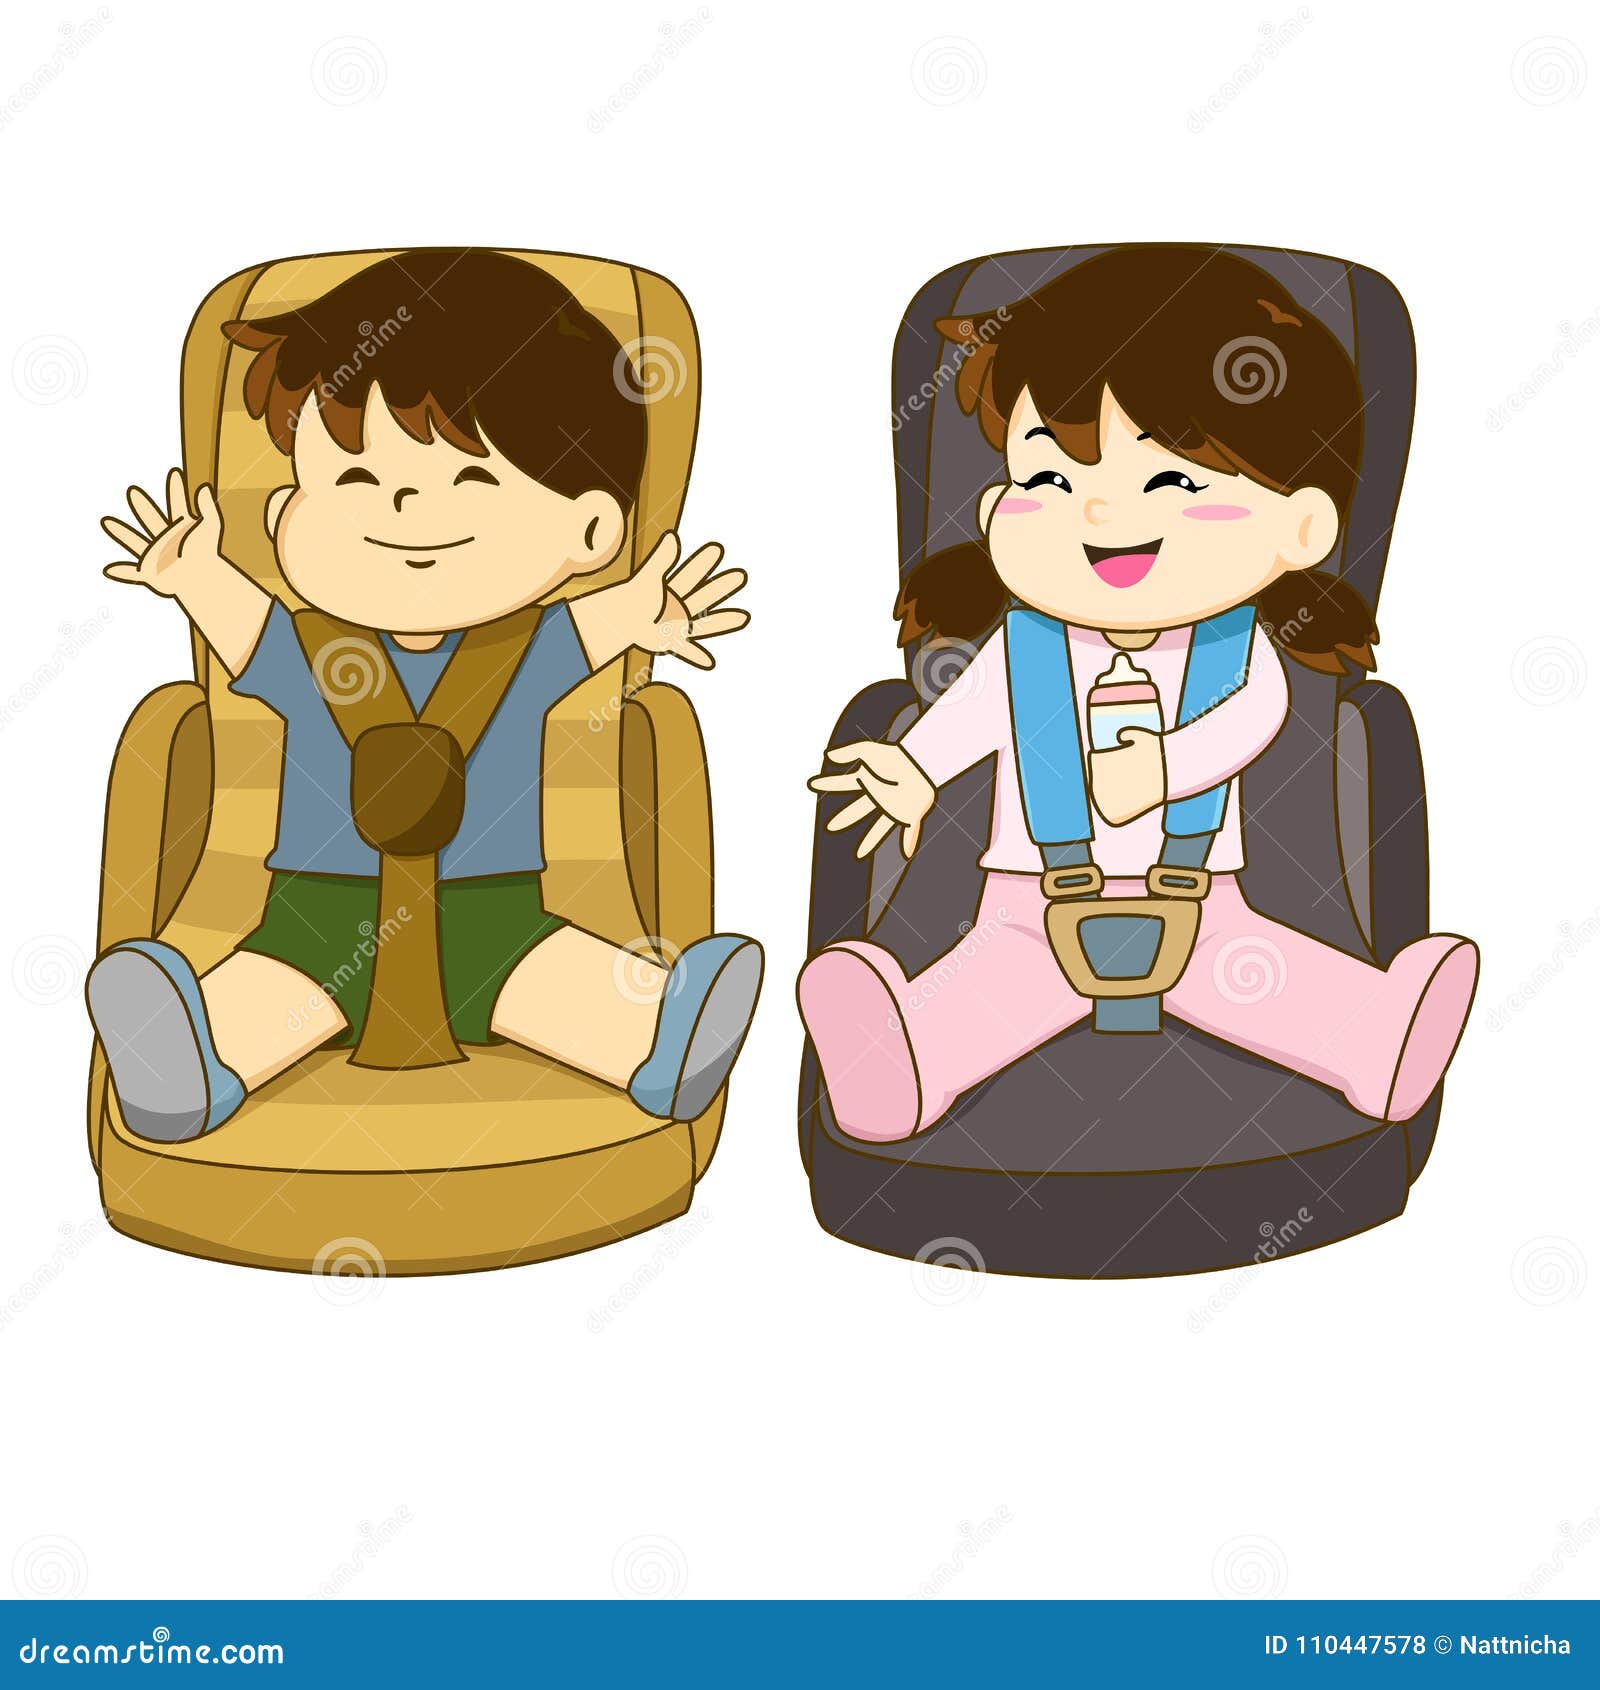 boy and girl sitting on car seat